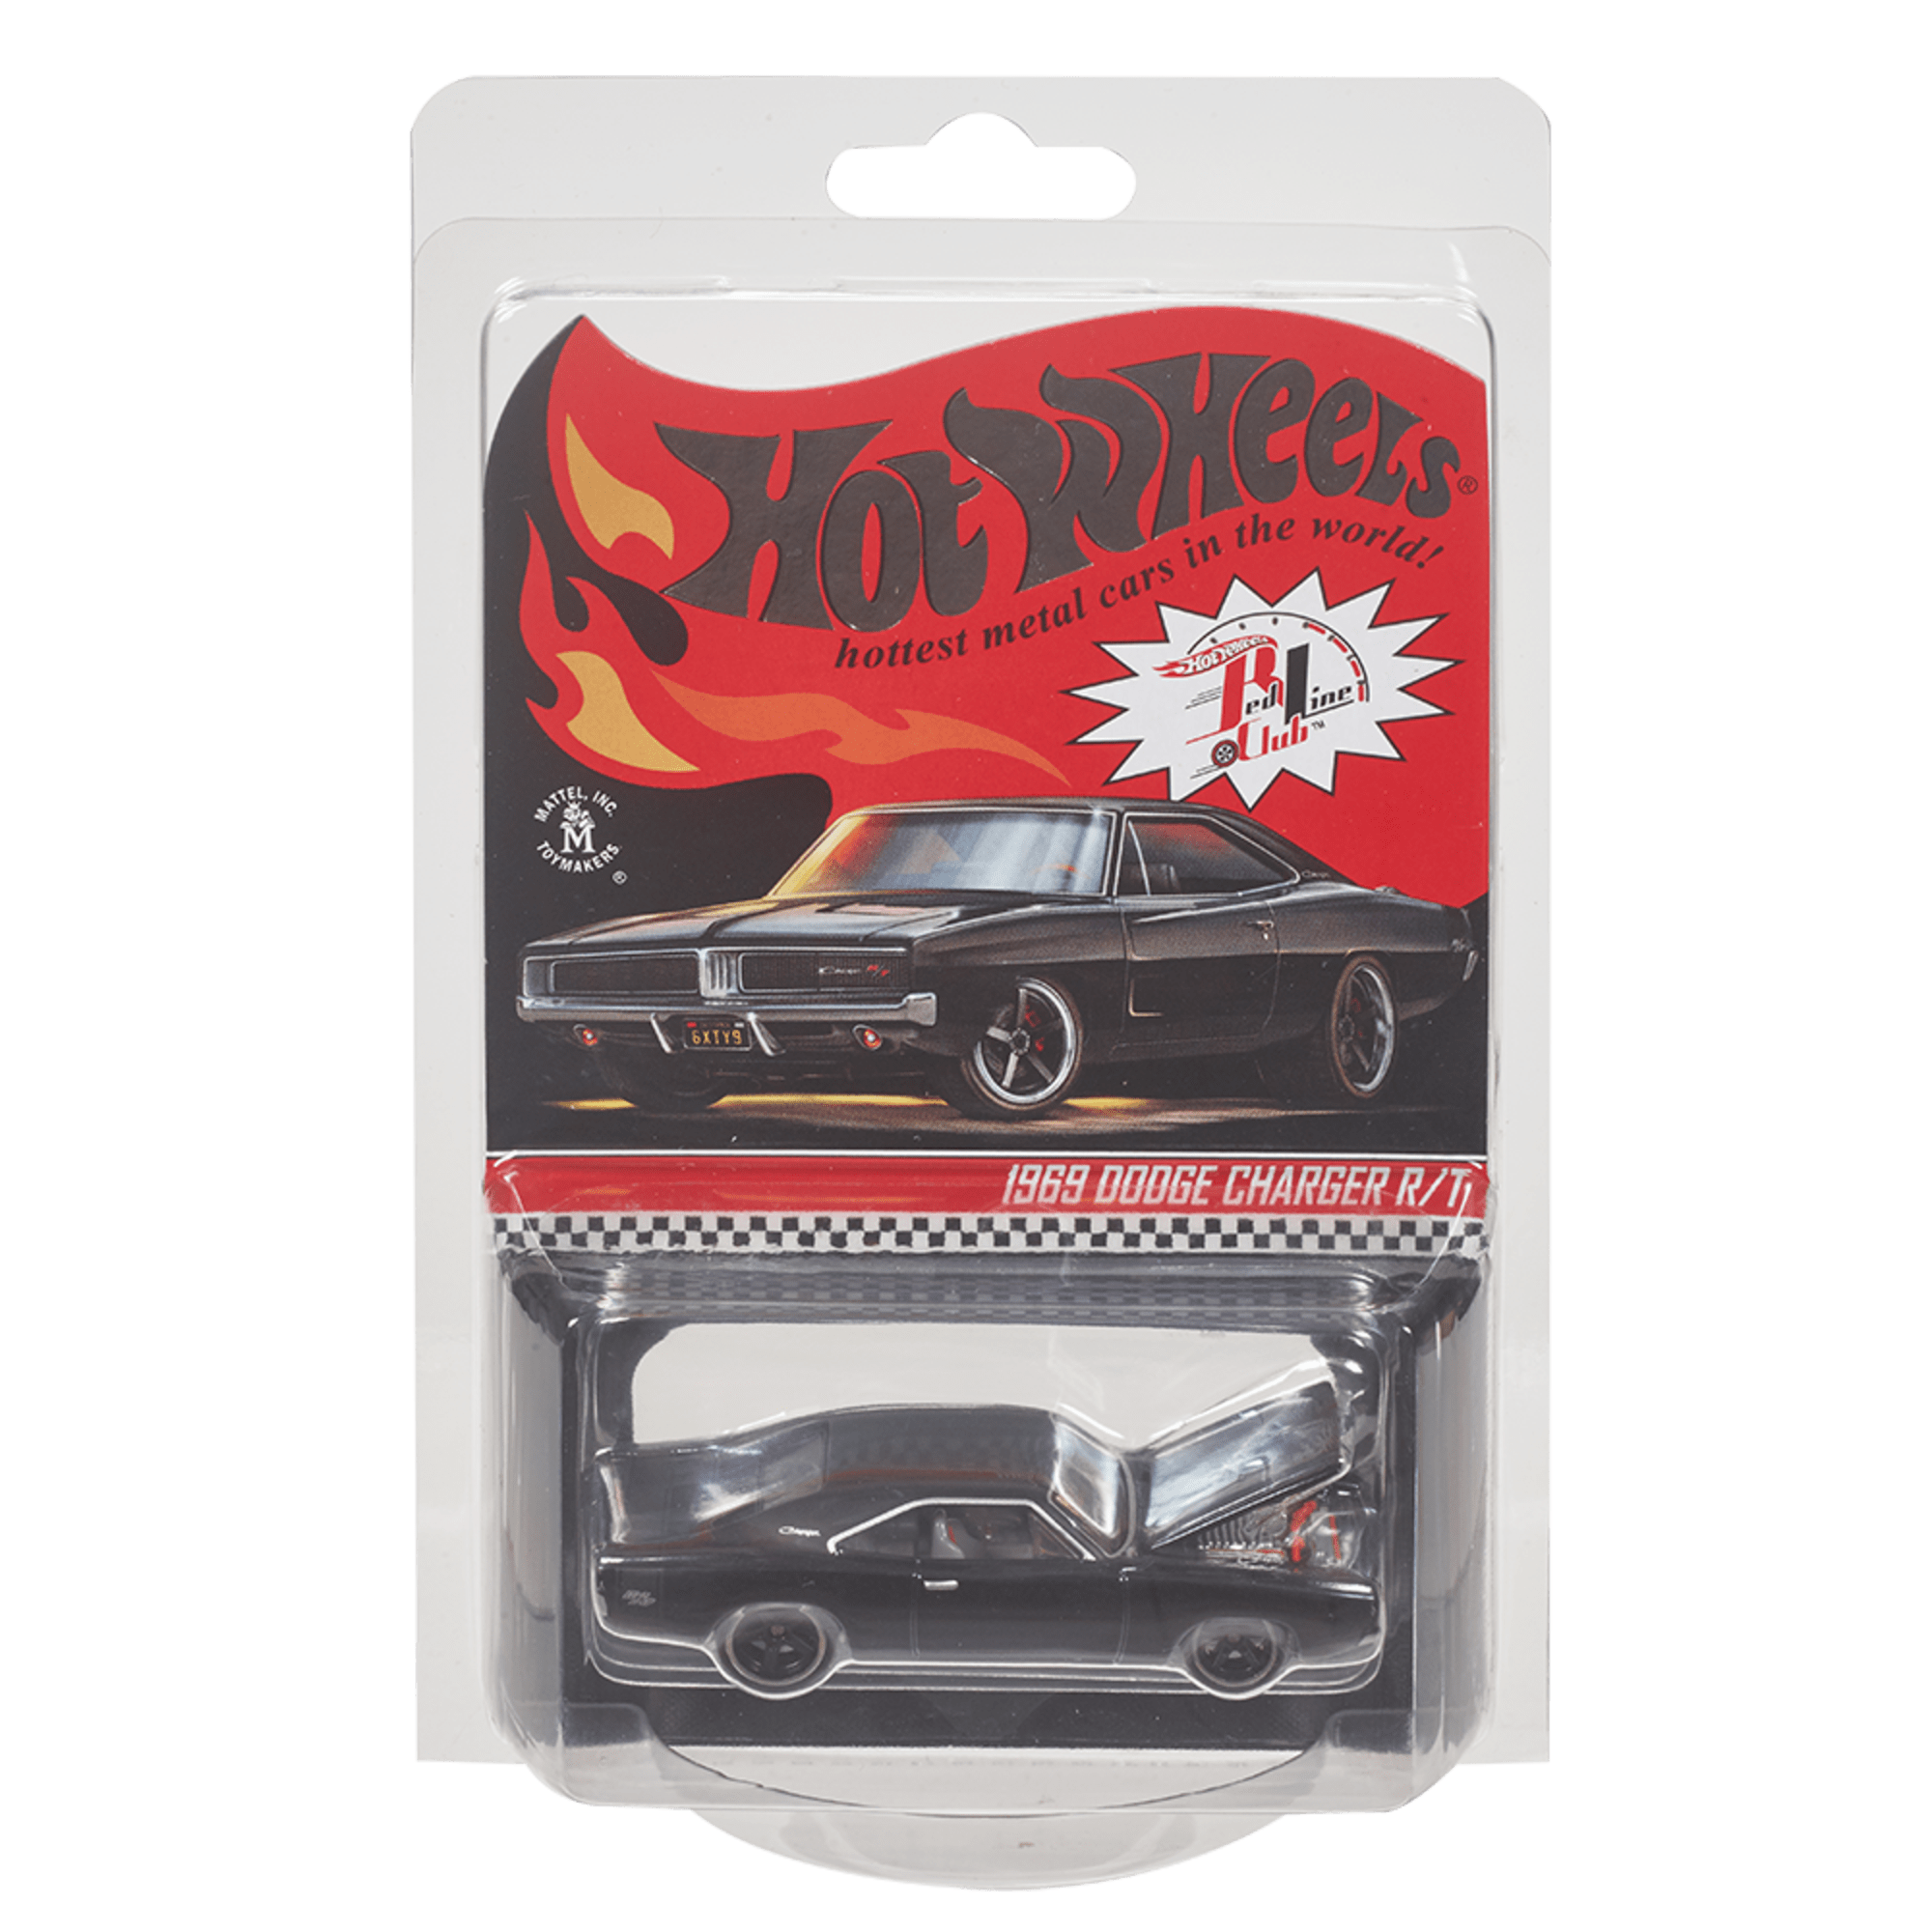 RLC Exclusive 1969 Dodge Charger R/T – Mattel Creations